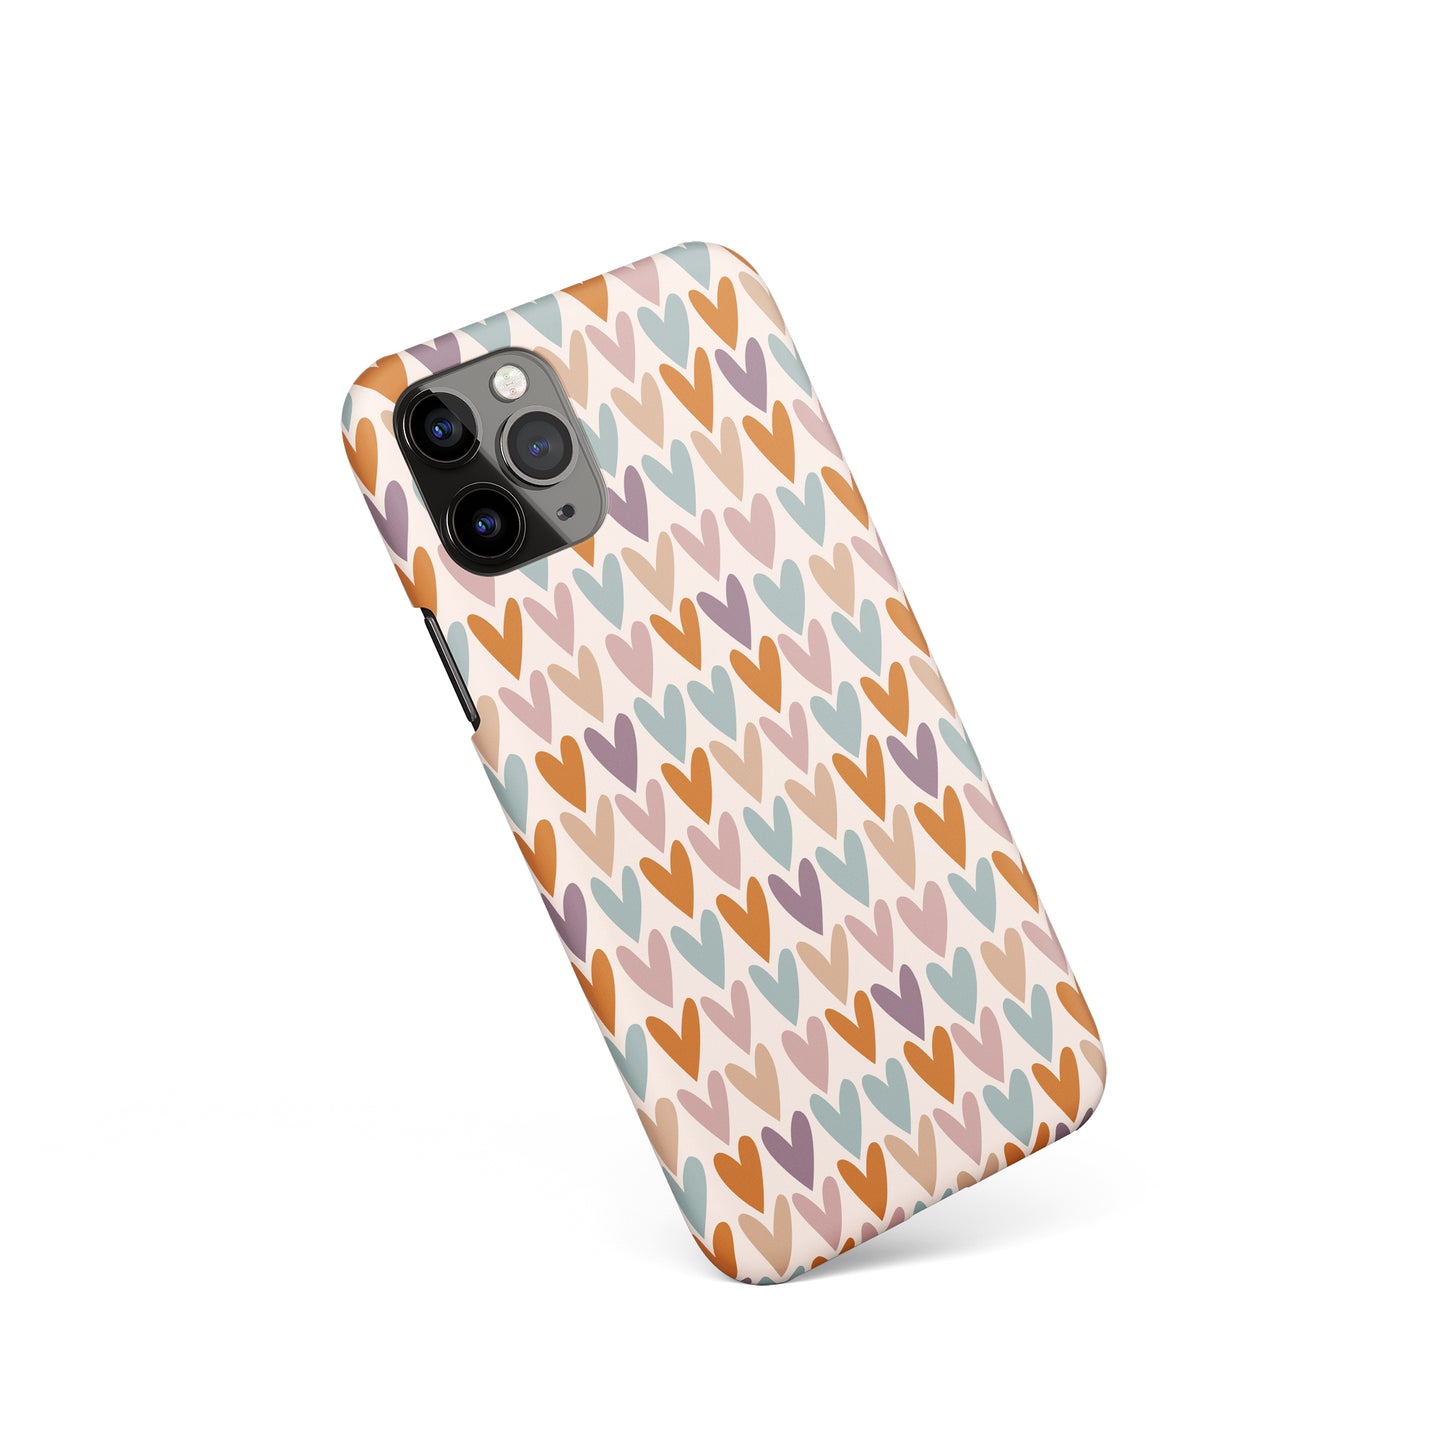 Cute iPhone Case with small hearts pattern